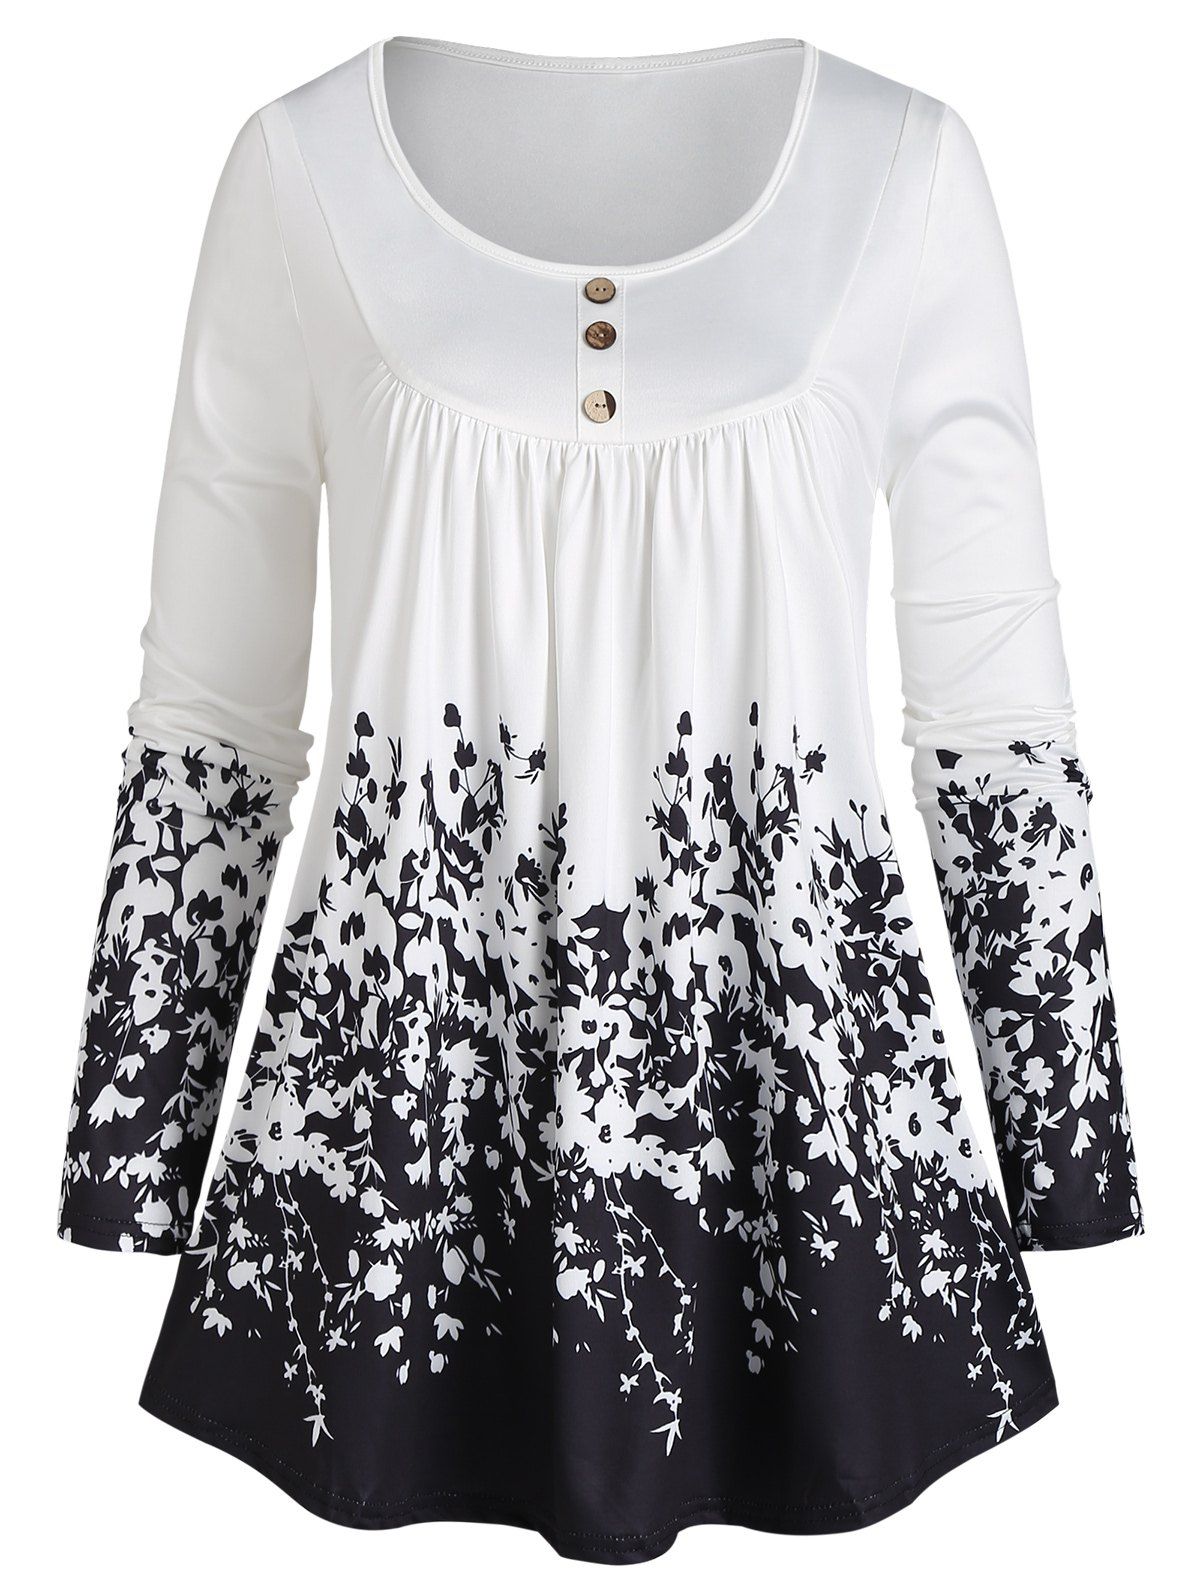 Ruched Button Front Floral Top - WHITE M